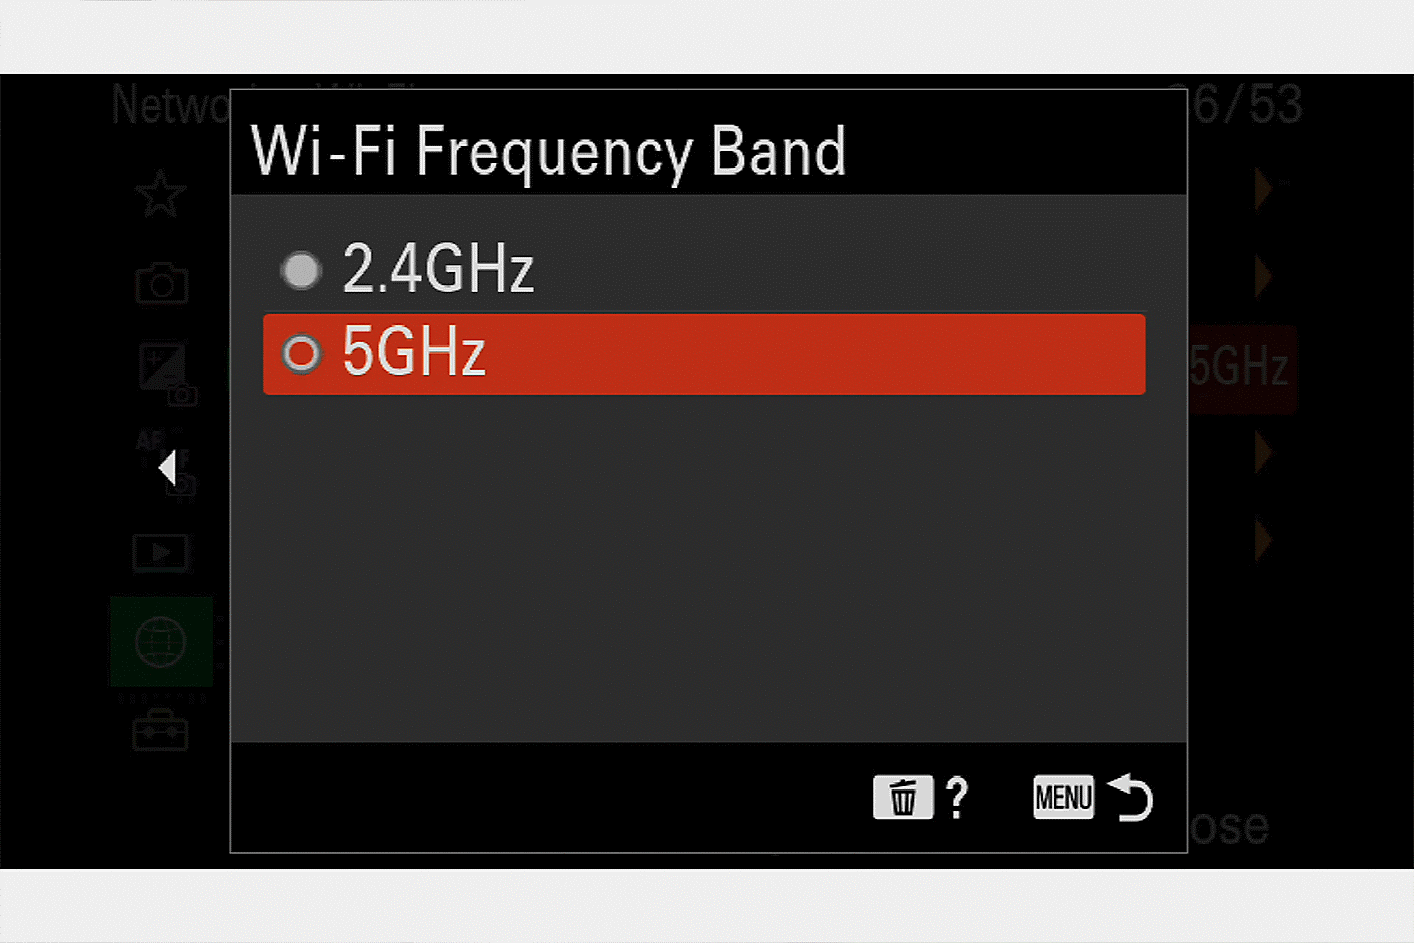 The menu display for selecting between 5‑GHz and 2.4‑GHz settings